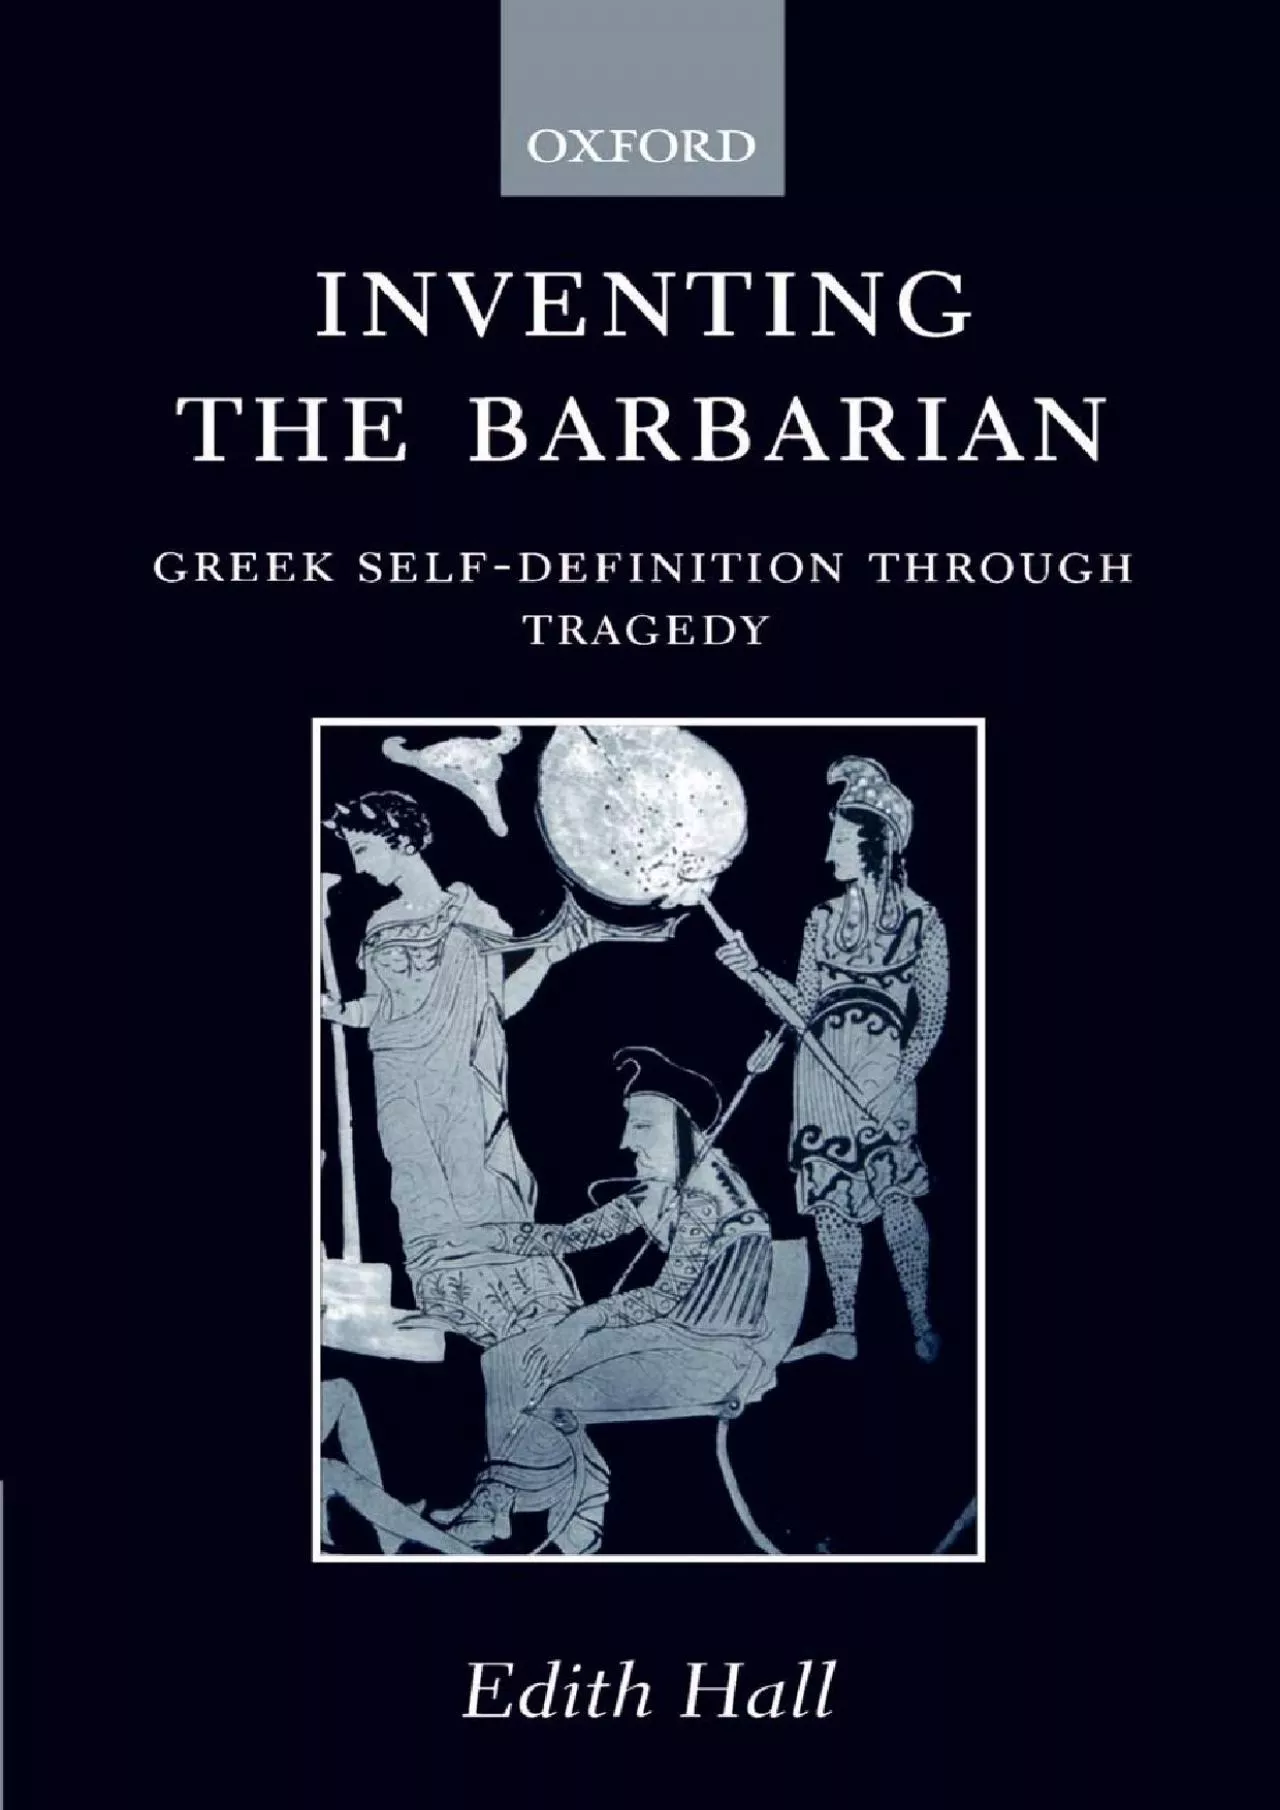 [BOOK]-Inventing the Barbarian: Greek Self-Definition through Tragedy (Oxford Classical